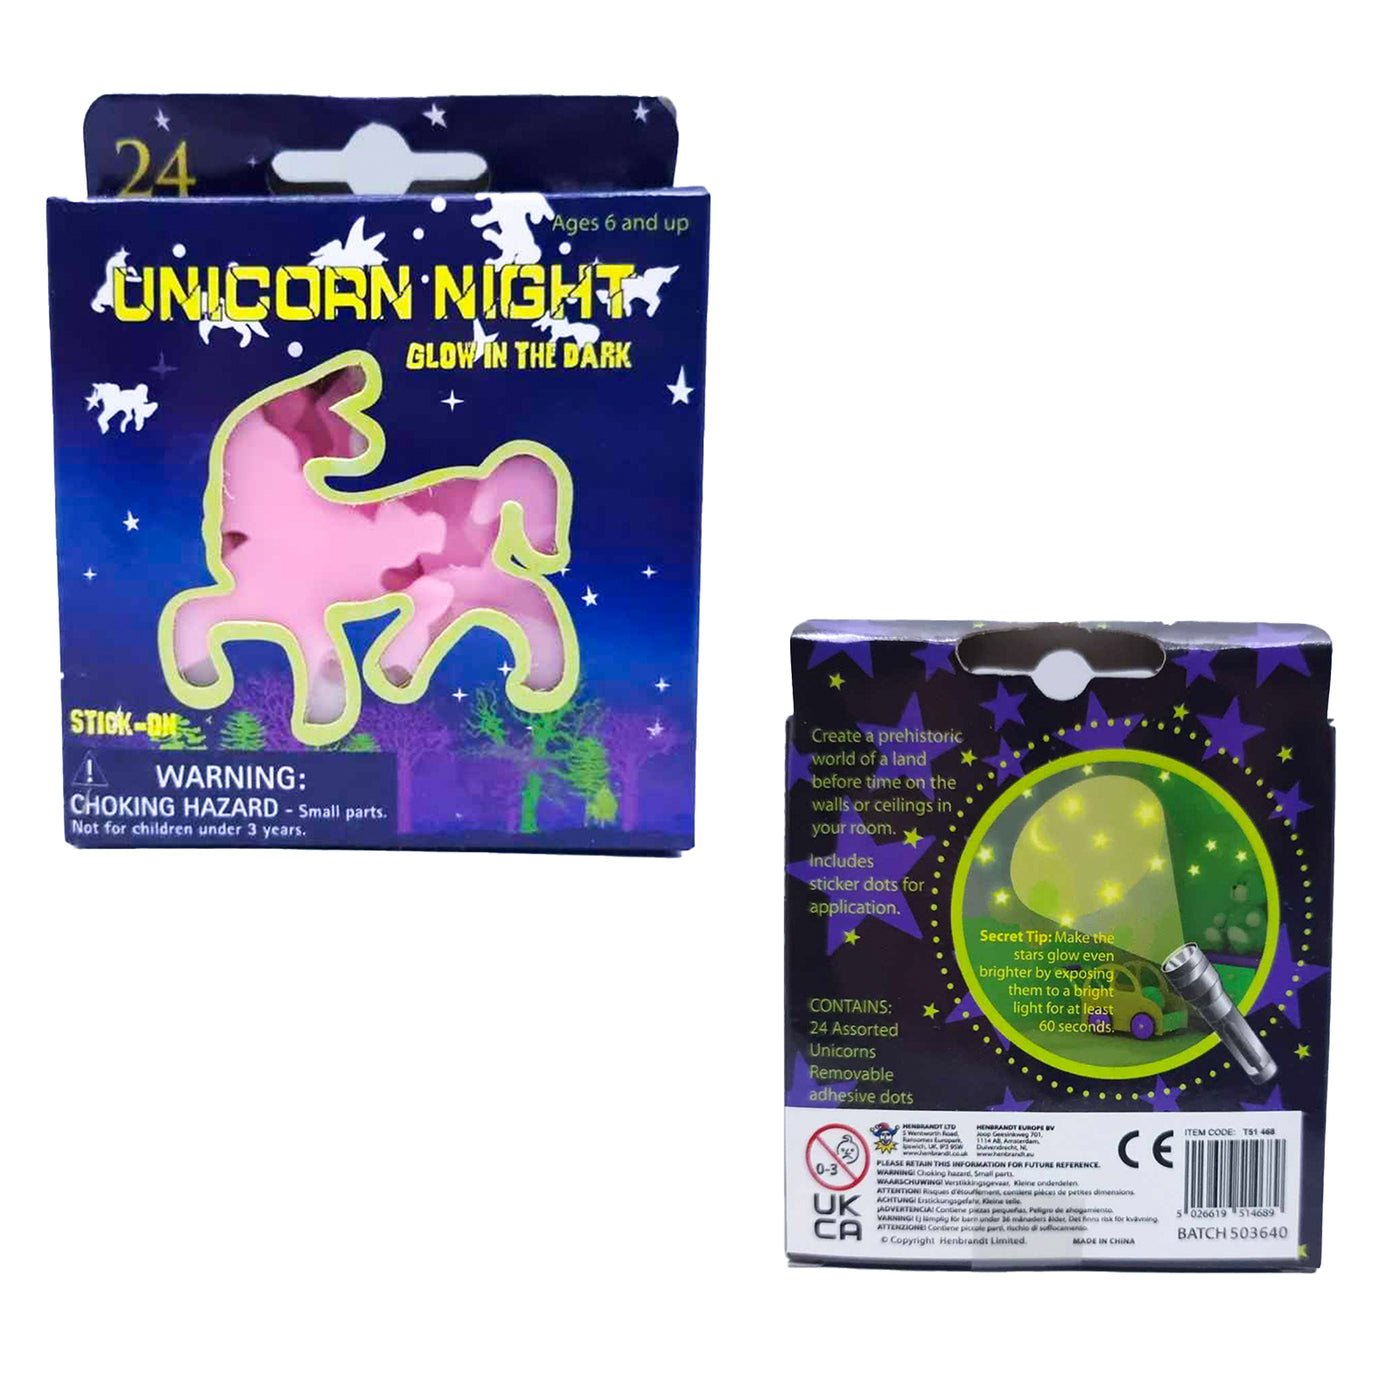 Pre Filled Magical Horn Unicorn Birthday Party Favours For Girls With Unicorn Toys.